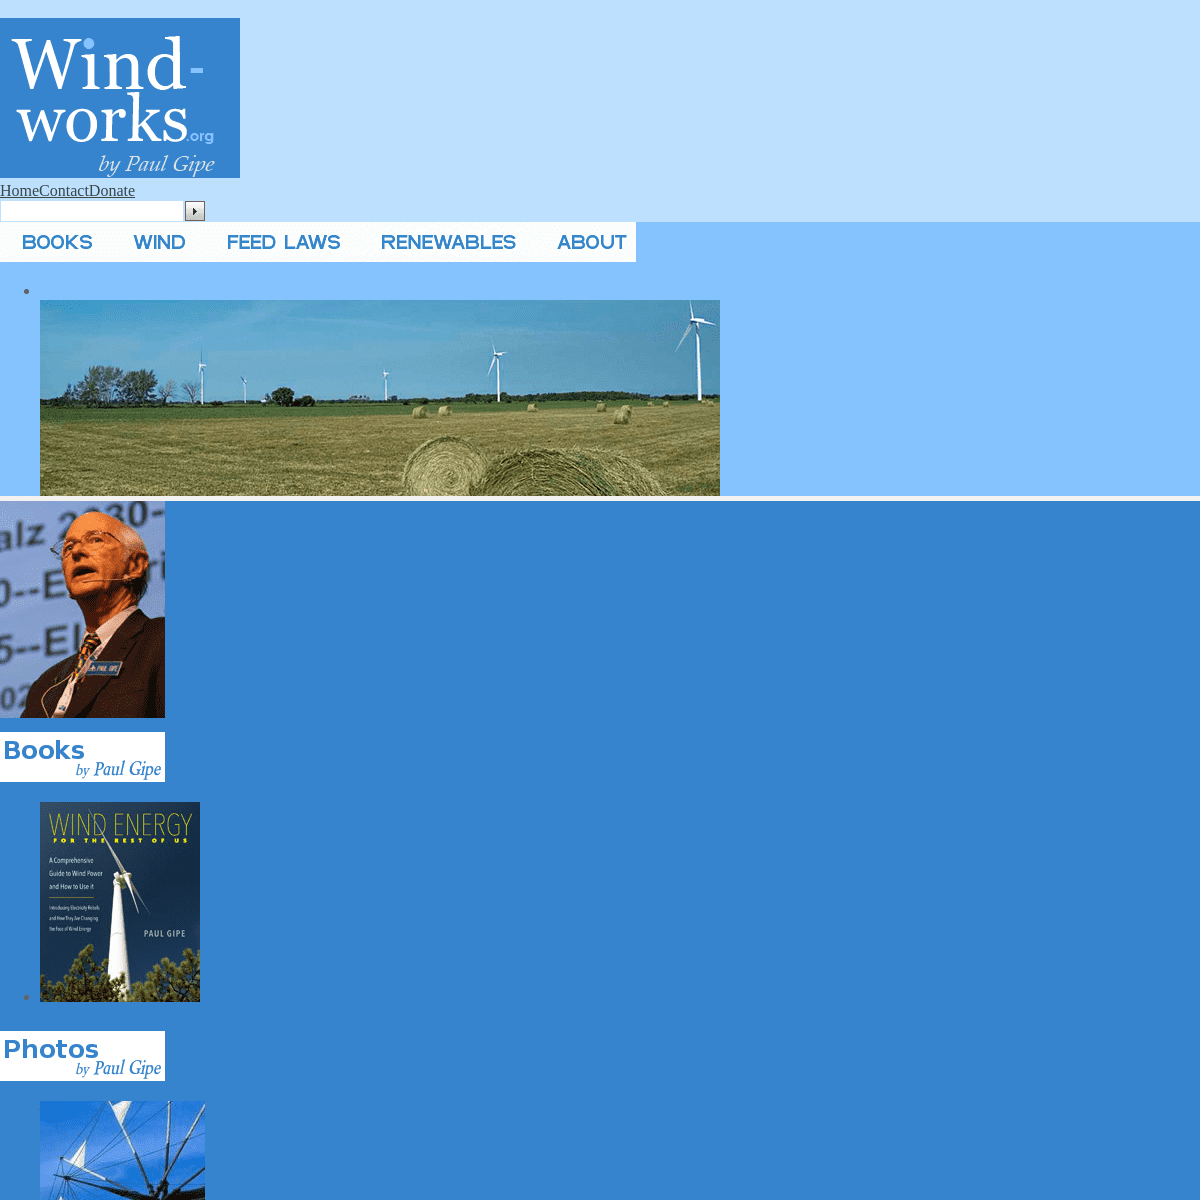 A complete backup of wind-works.org